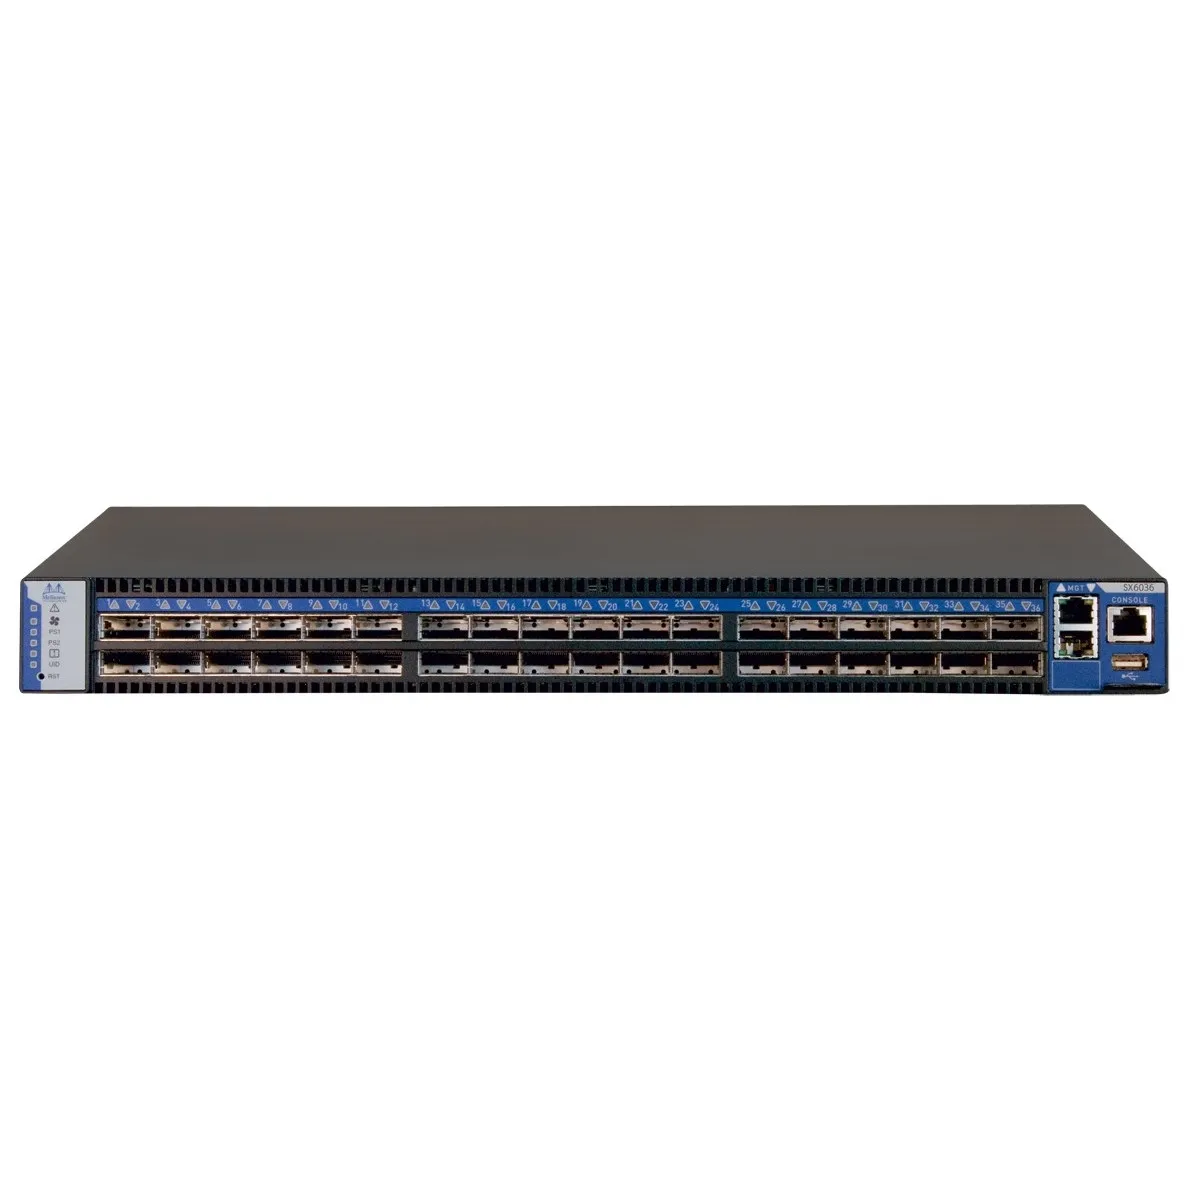 Mellanox SX6036 - 36xQSFP FDR InfiniBand Switch (with Inner Rails)